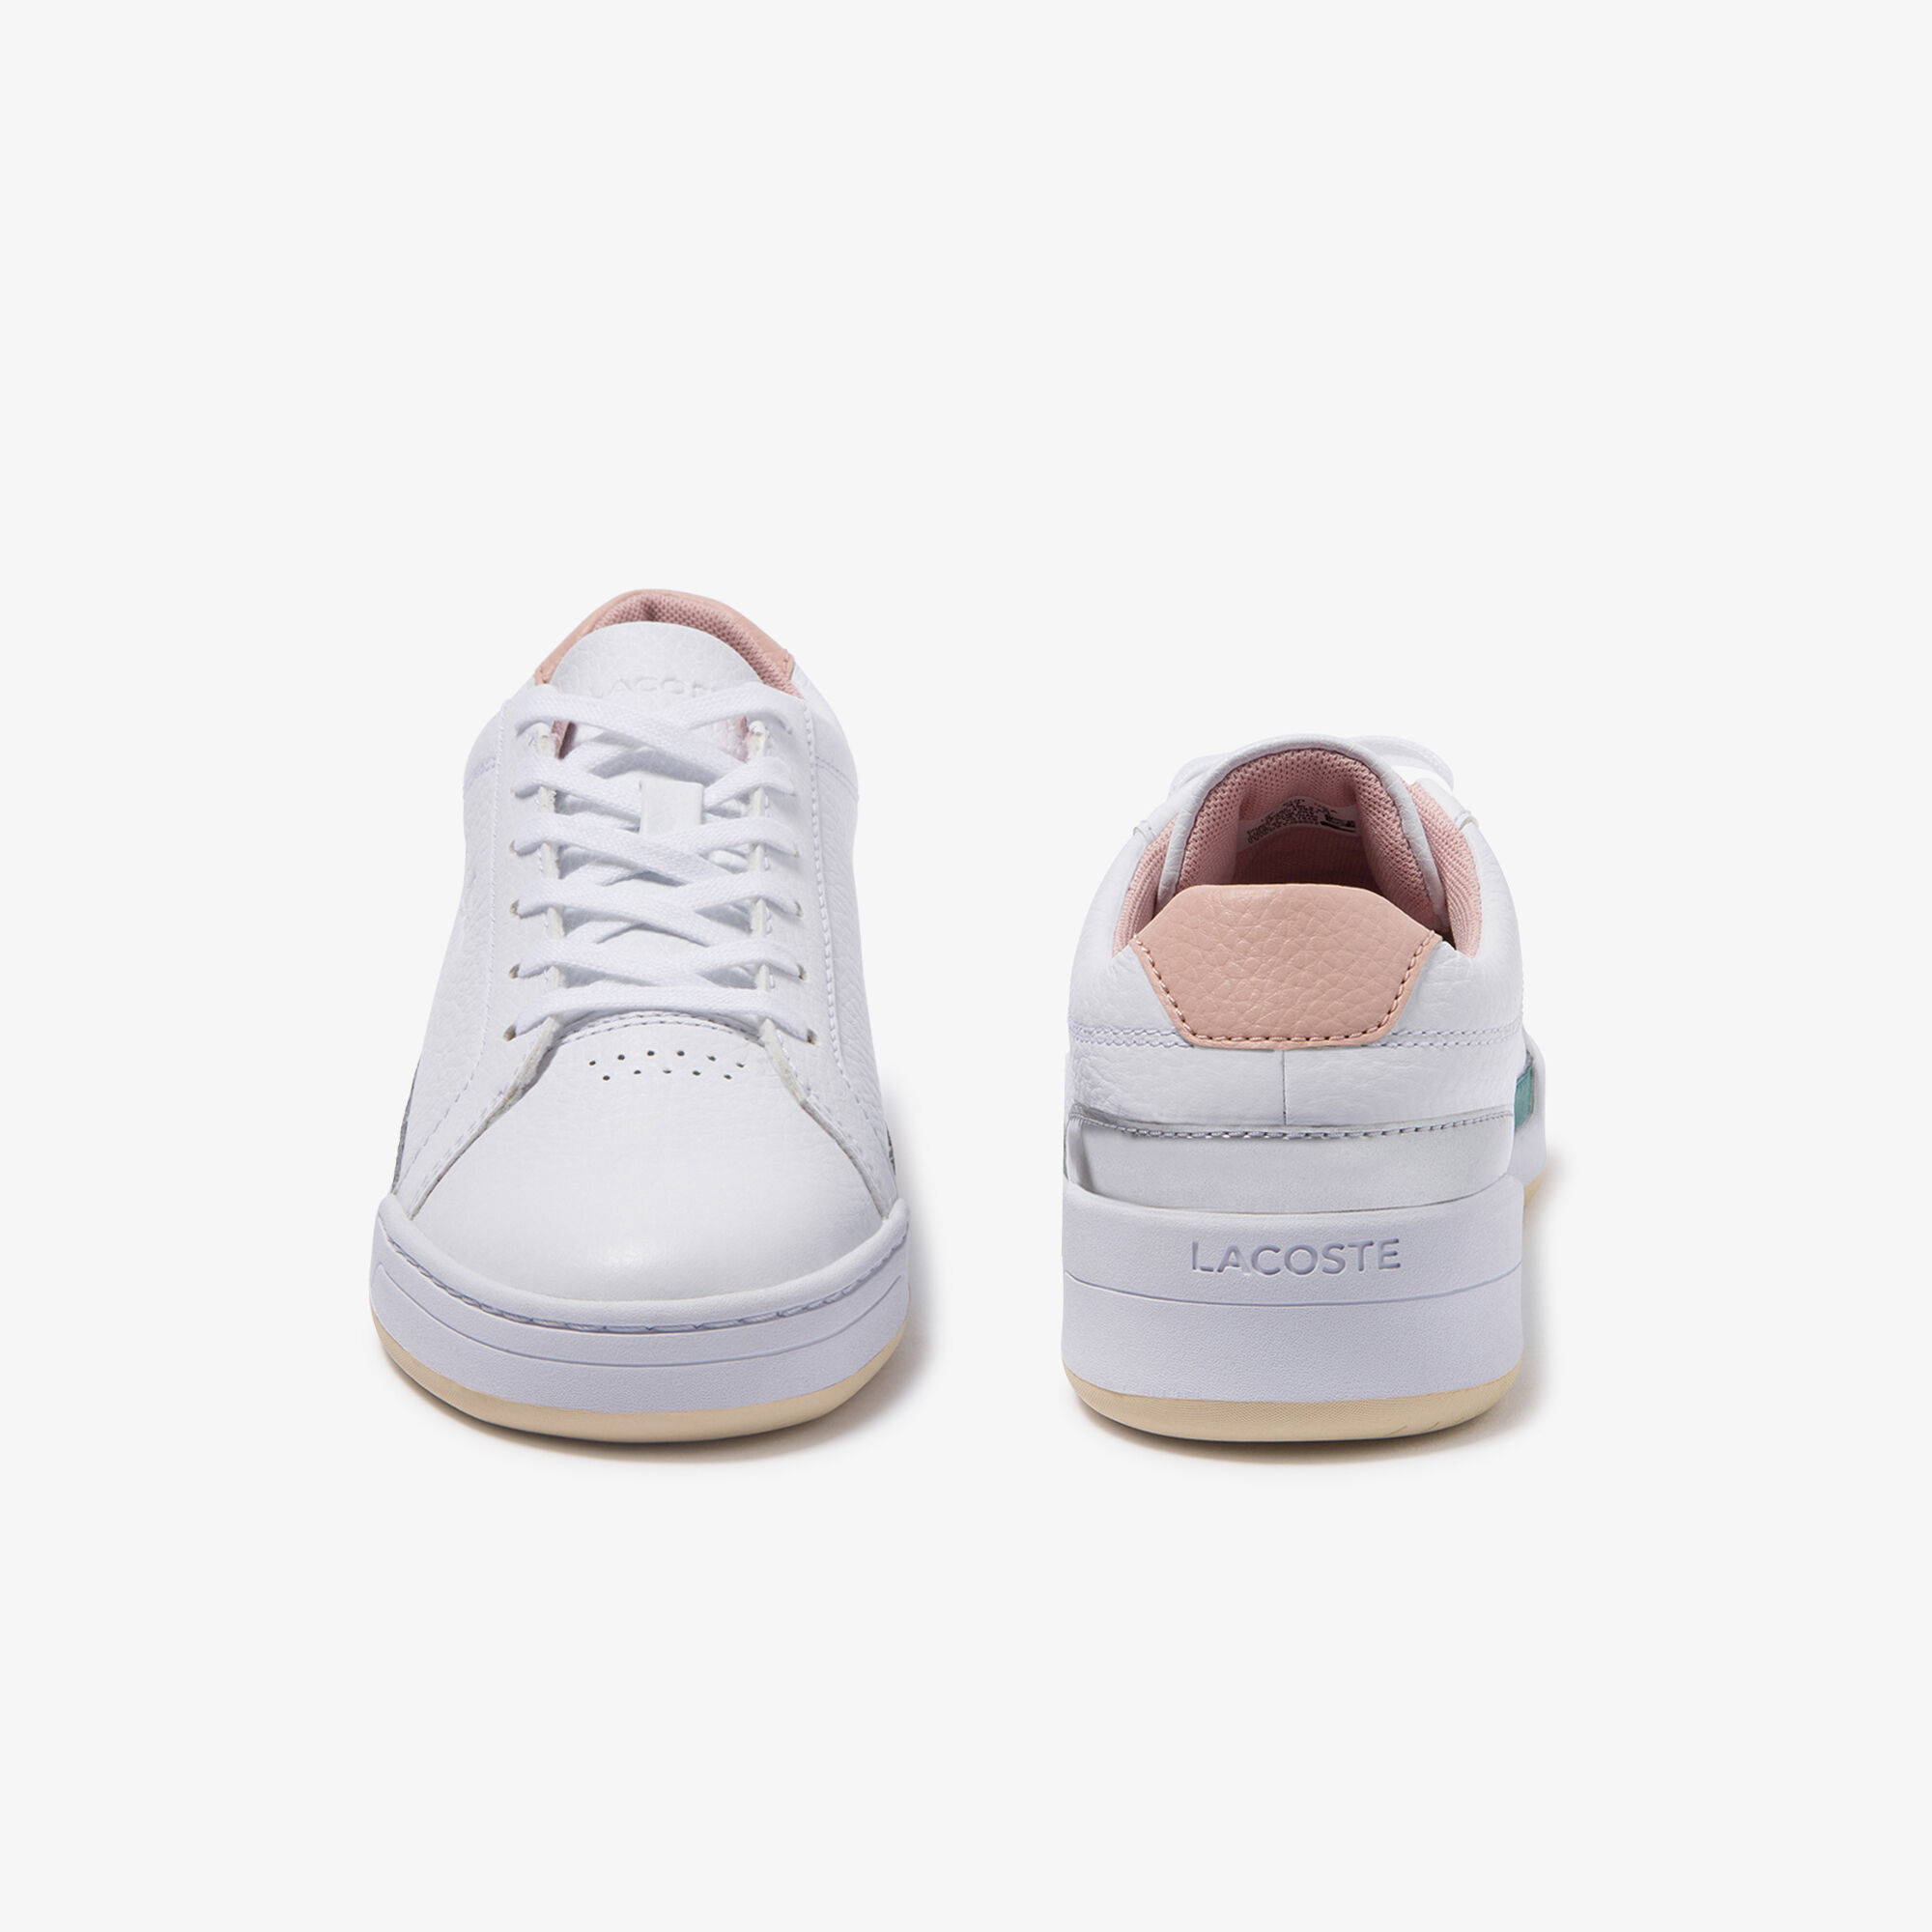 Women's Challenge Tumbled Leather Sneakers